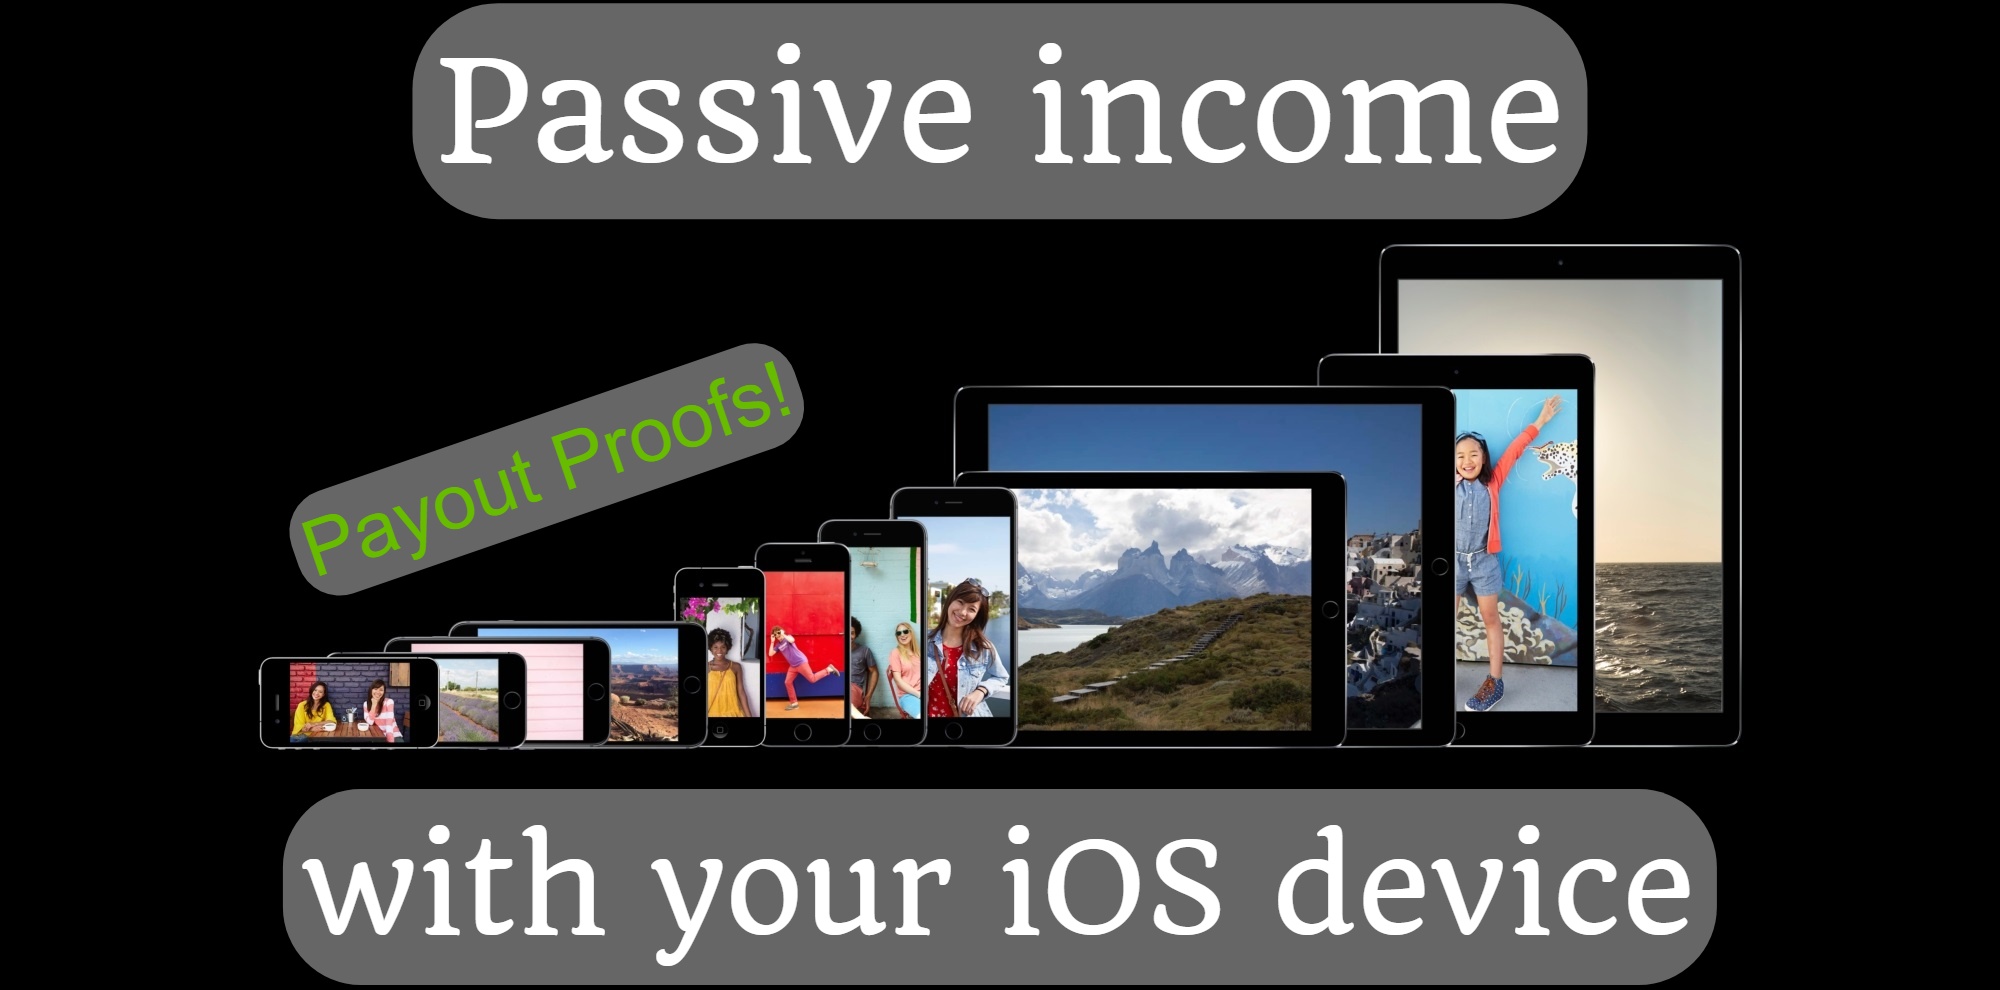 Passive income with your iOS device (Payout proofs!)